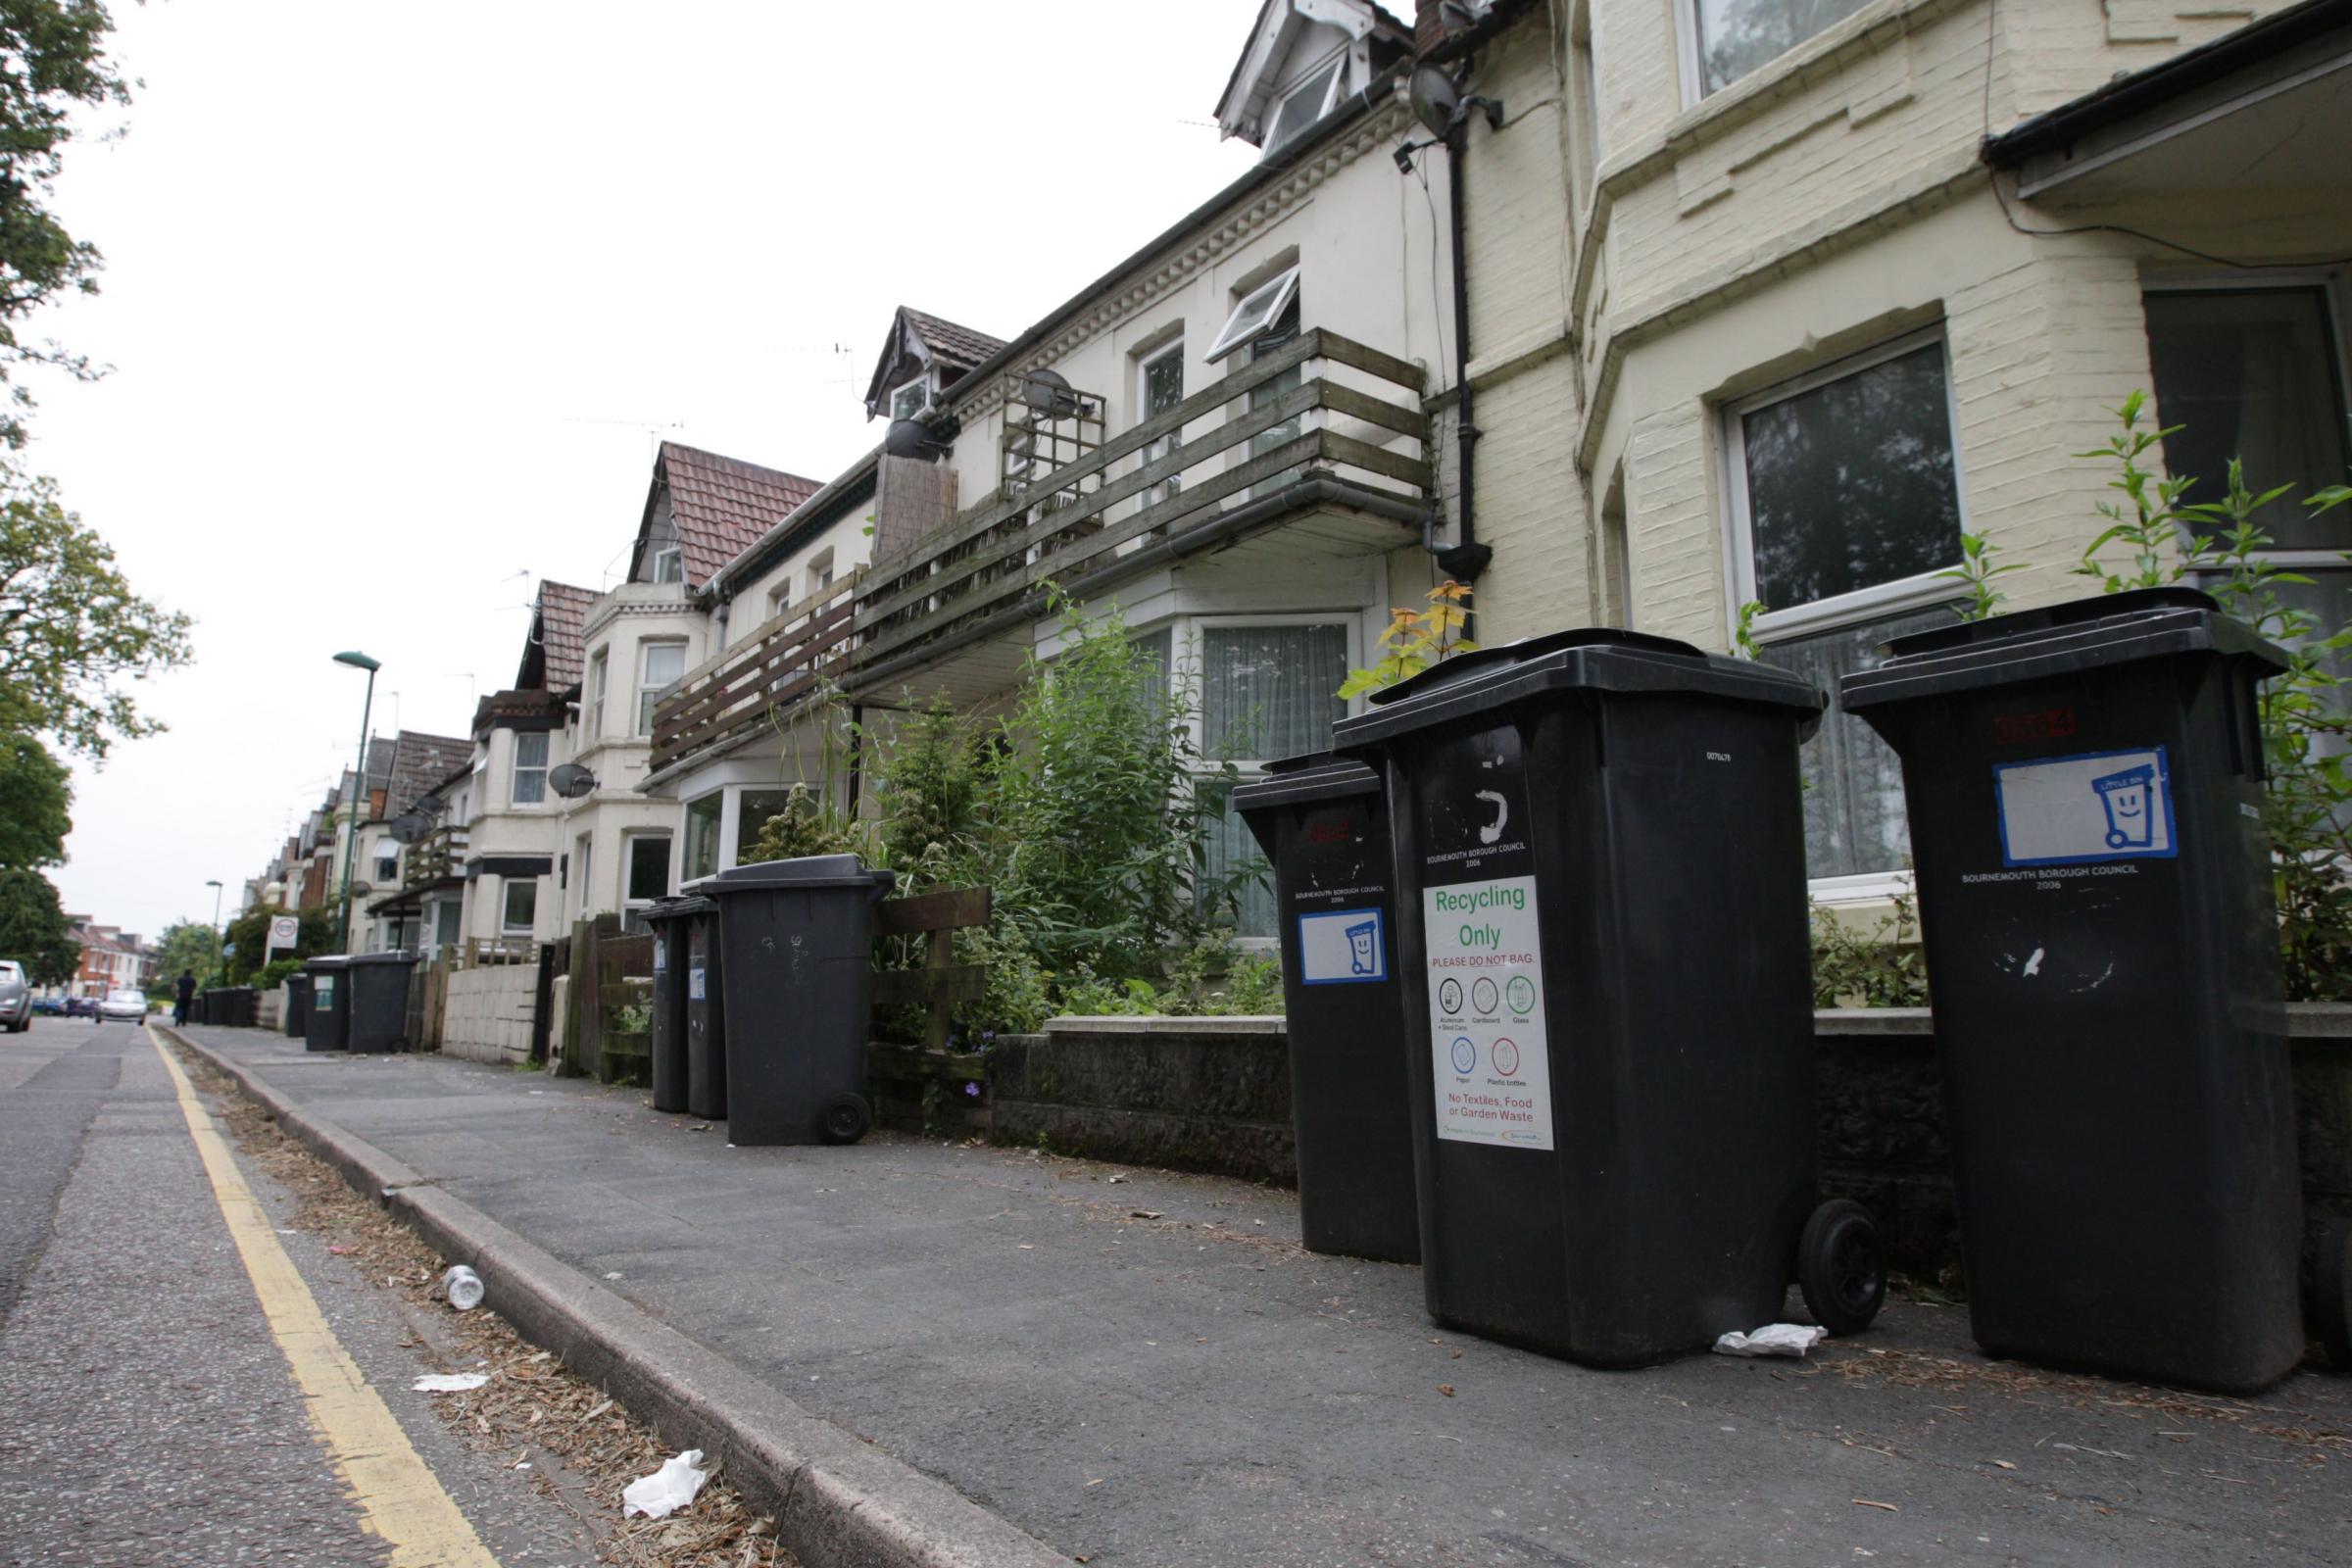 Landlords urged to oppose council licensing scheme - Bournemouth Echo